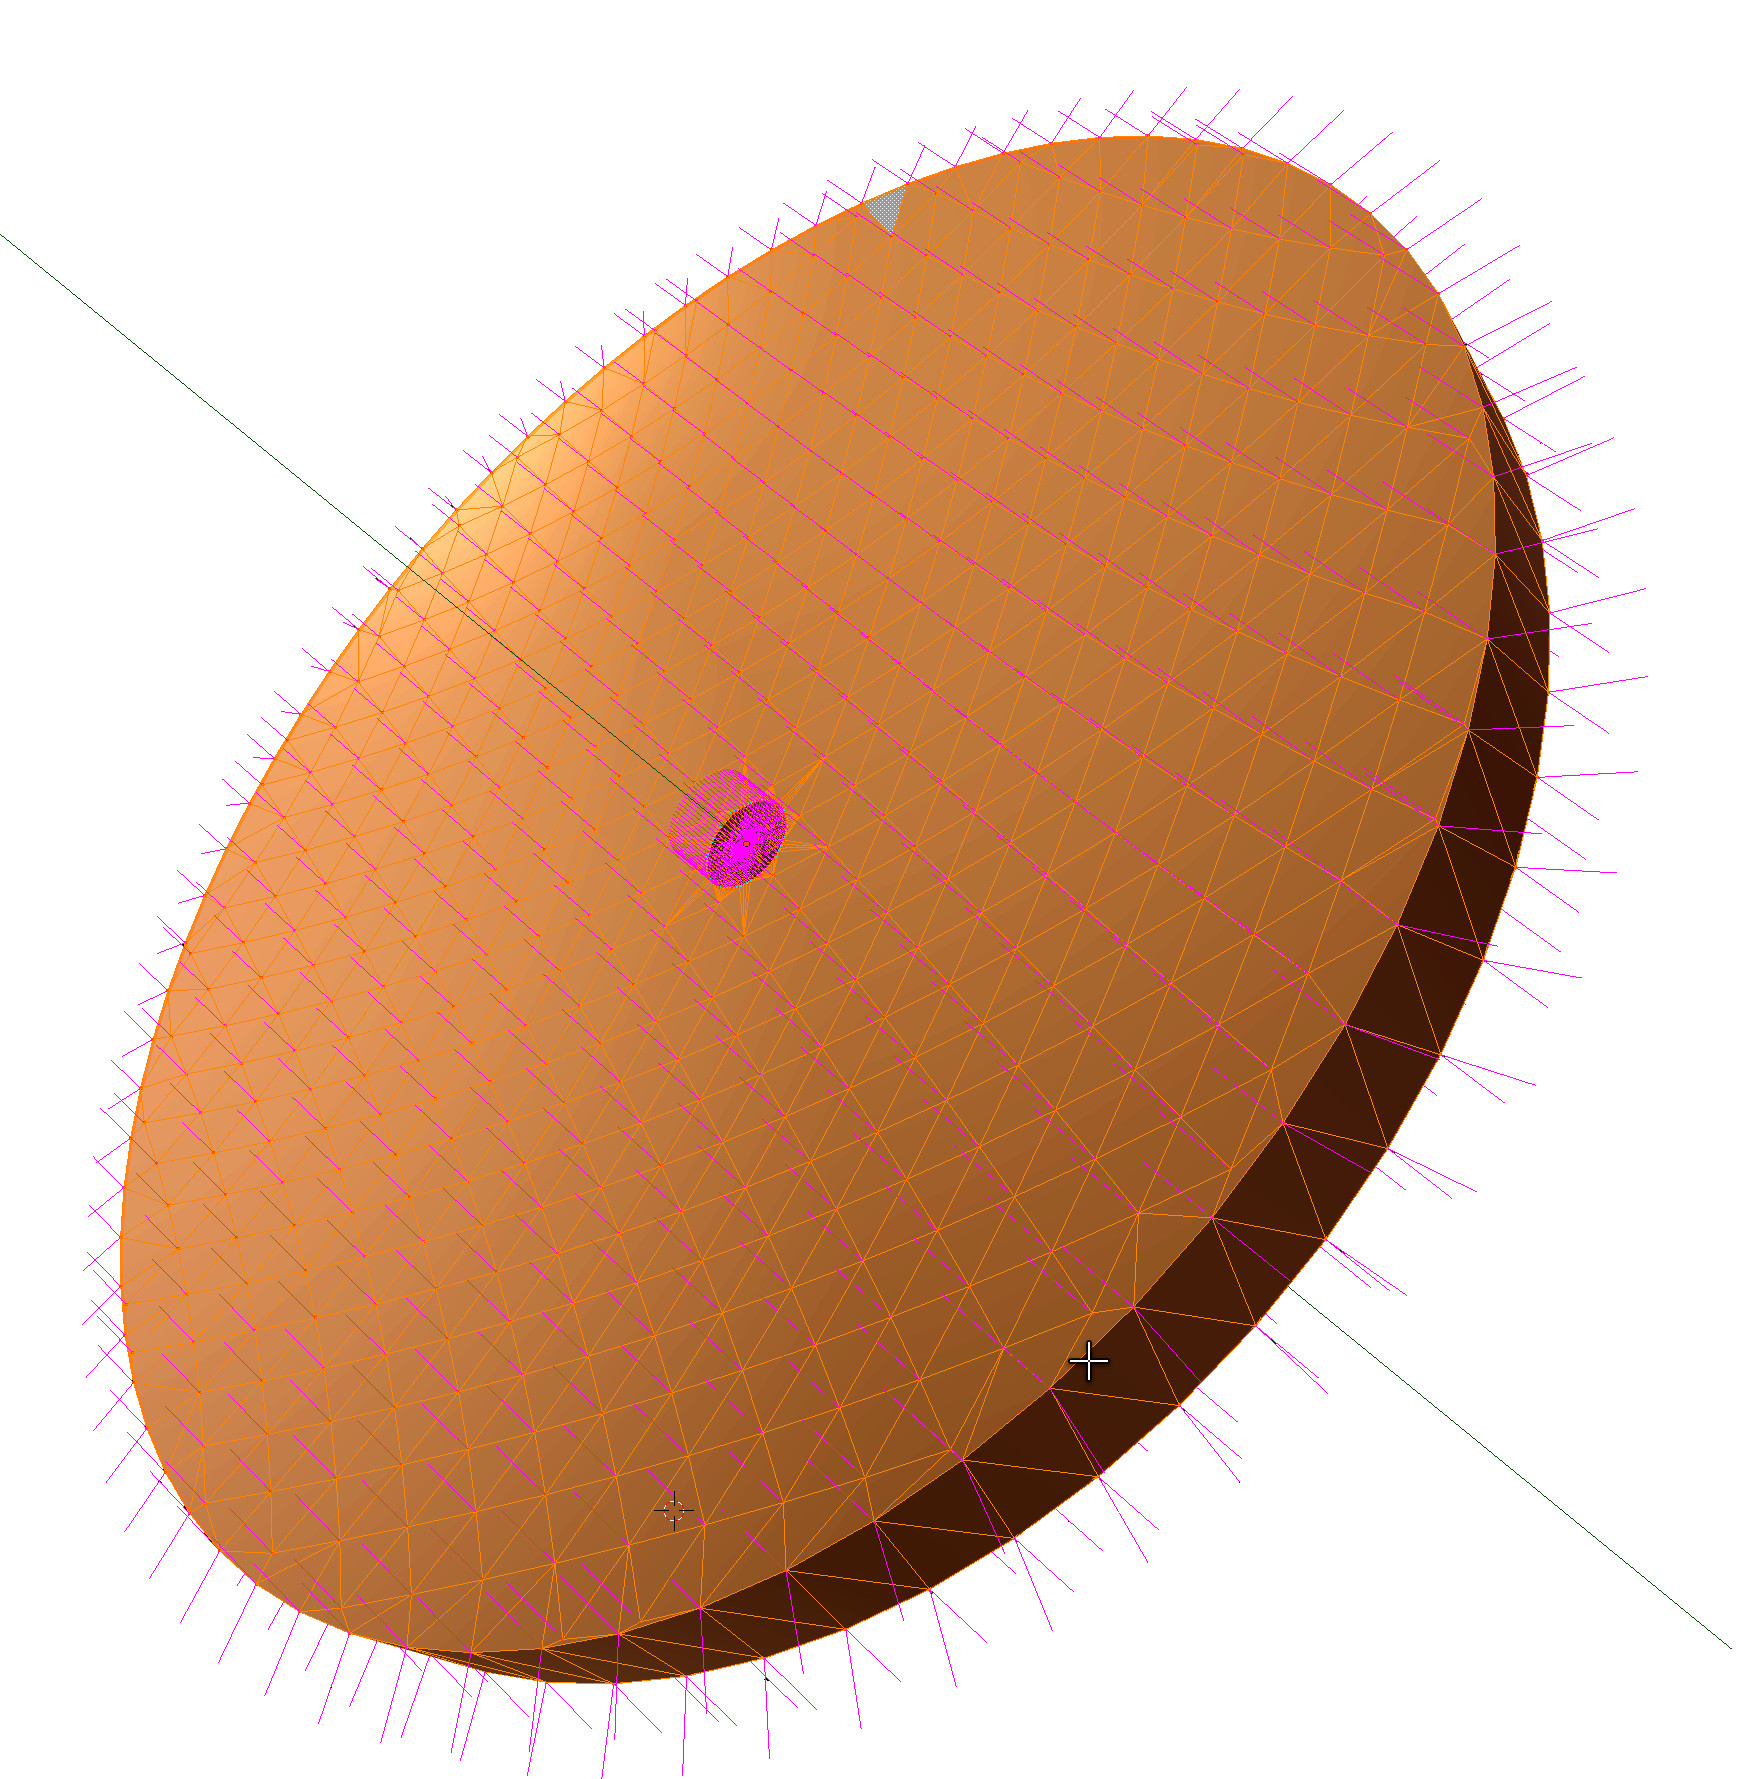 A spherical mirror with surface-normals